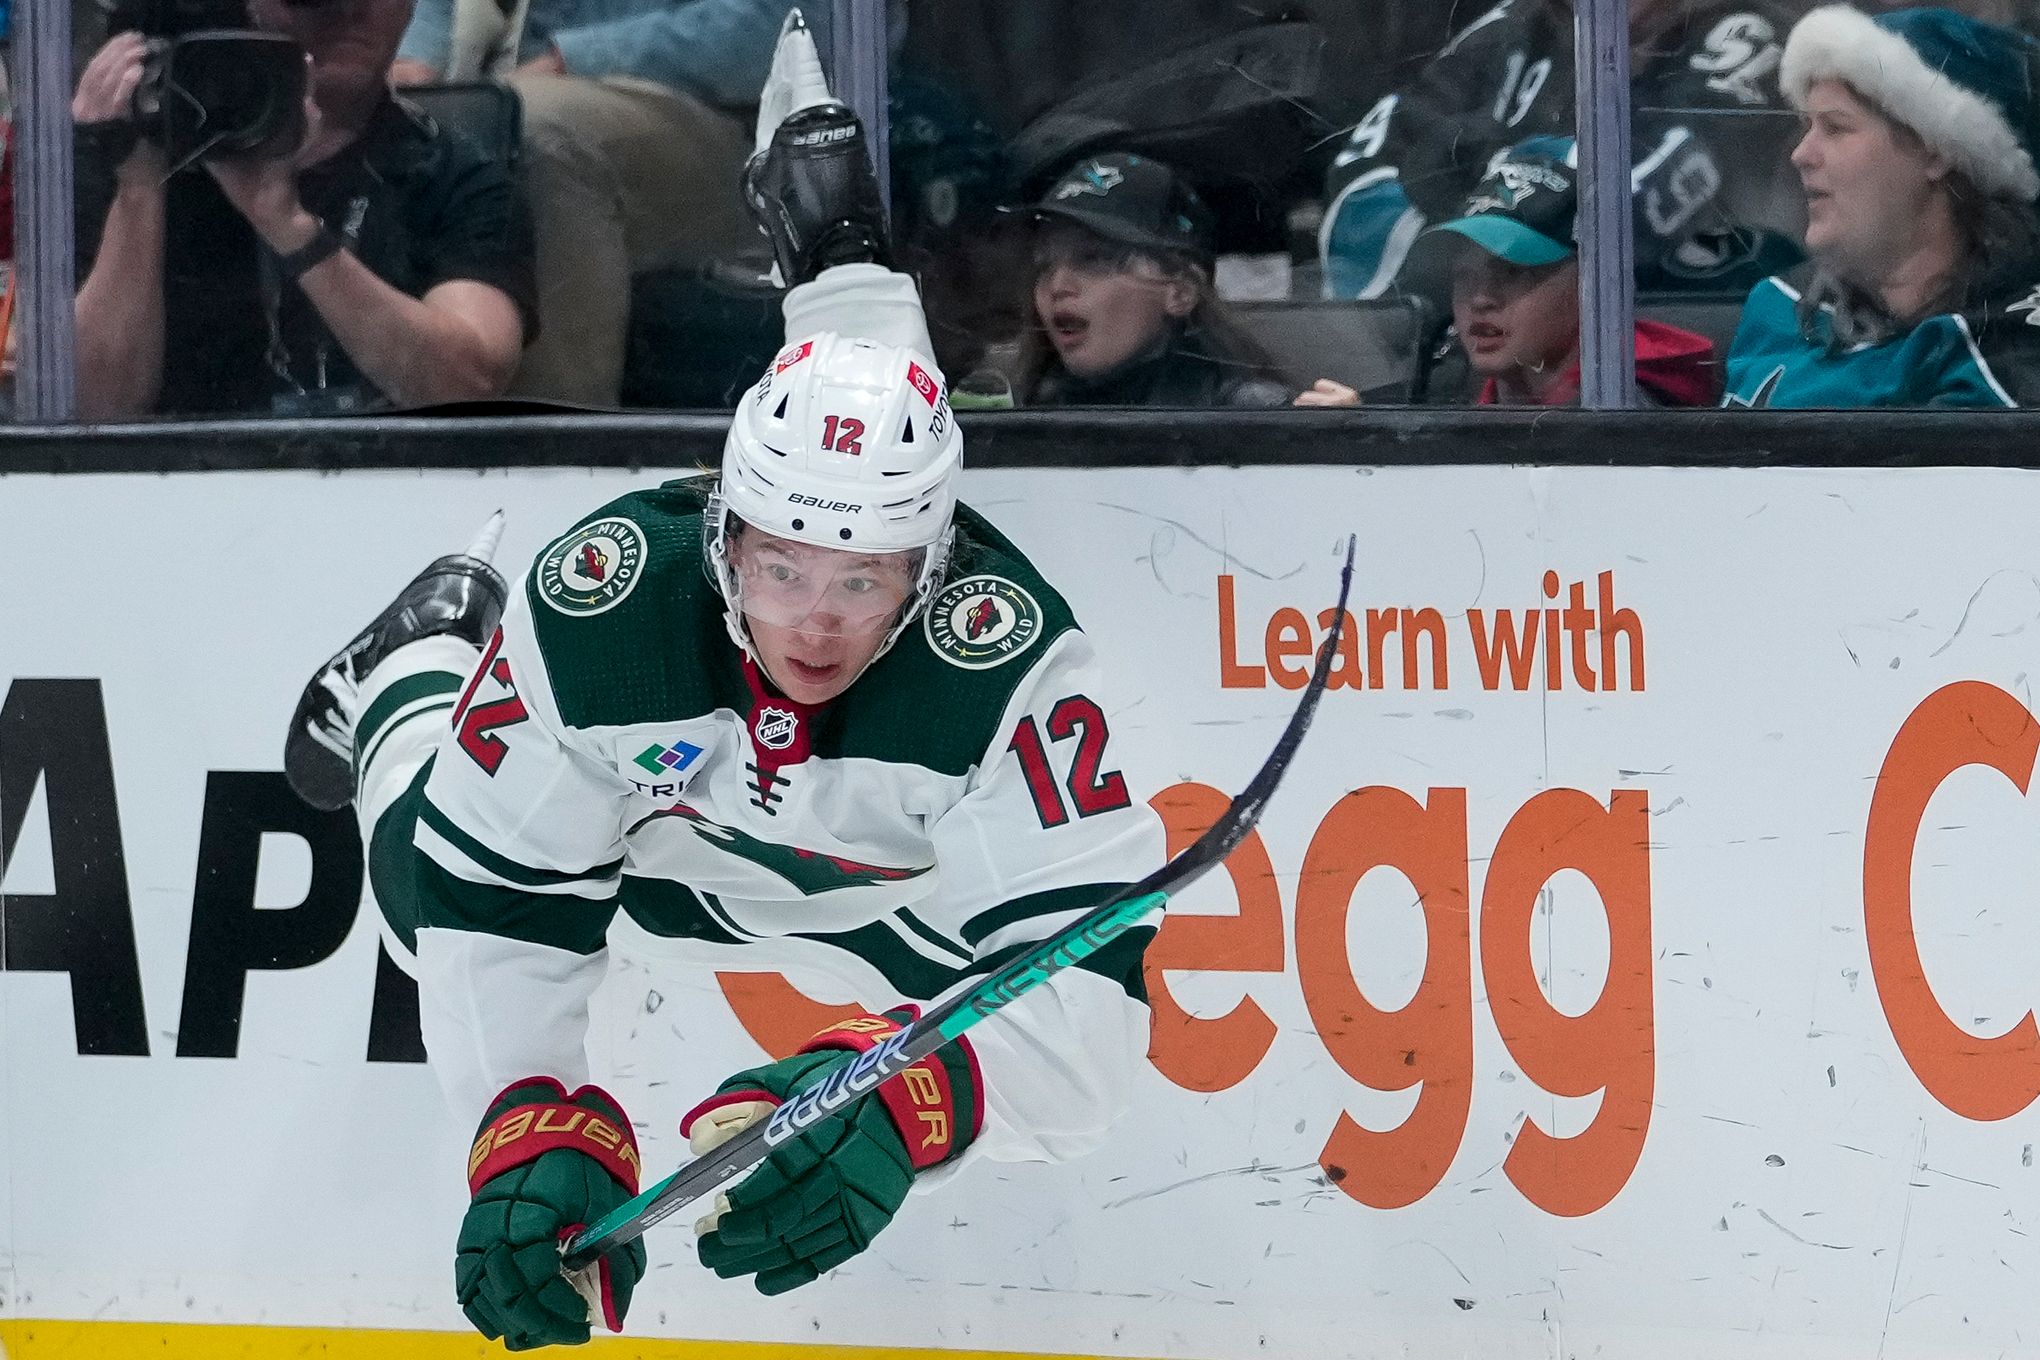 Zach Parise contract extension - The Hockey News